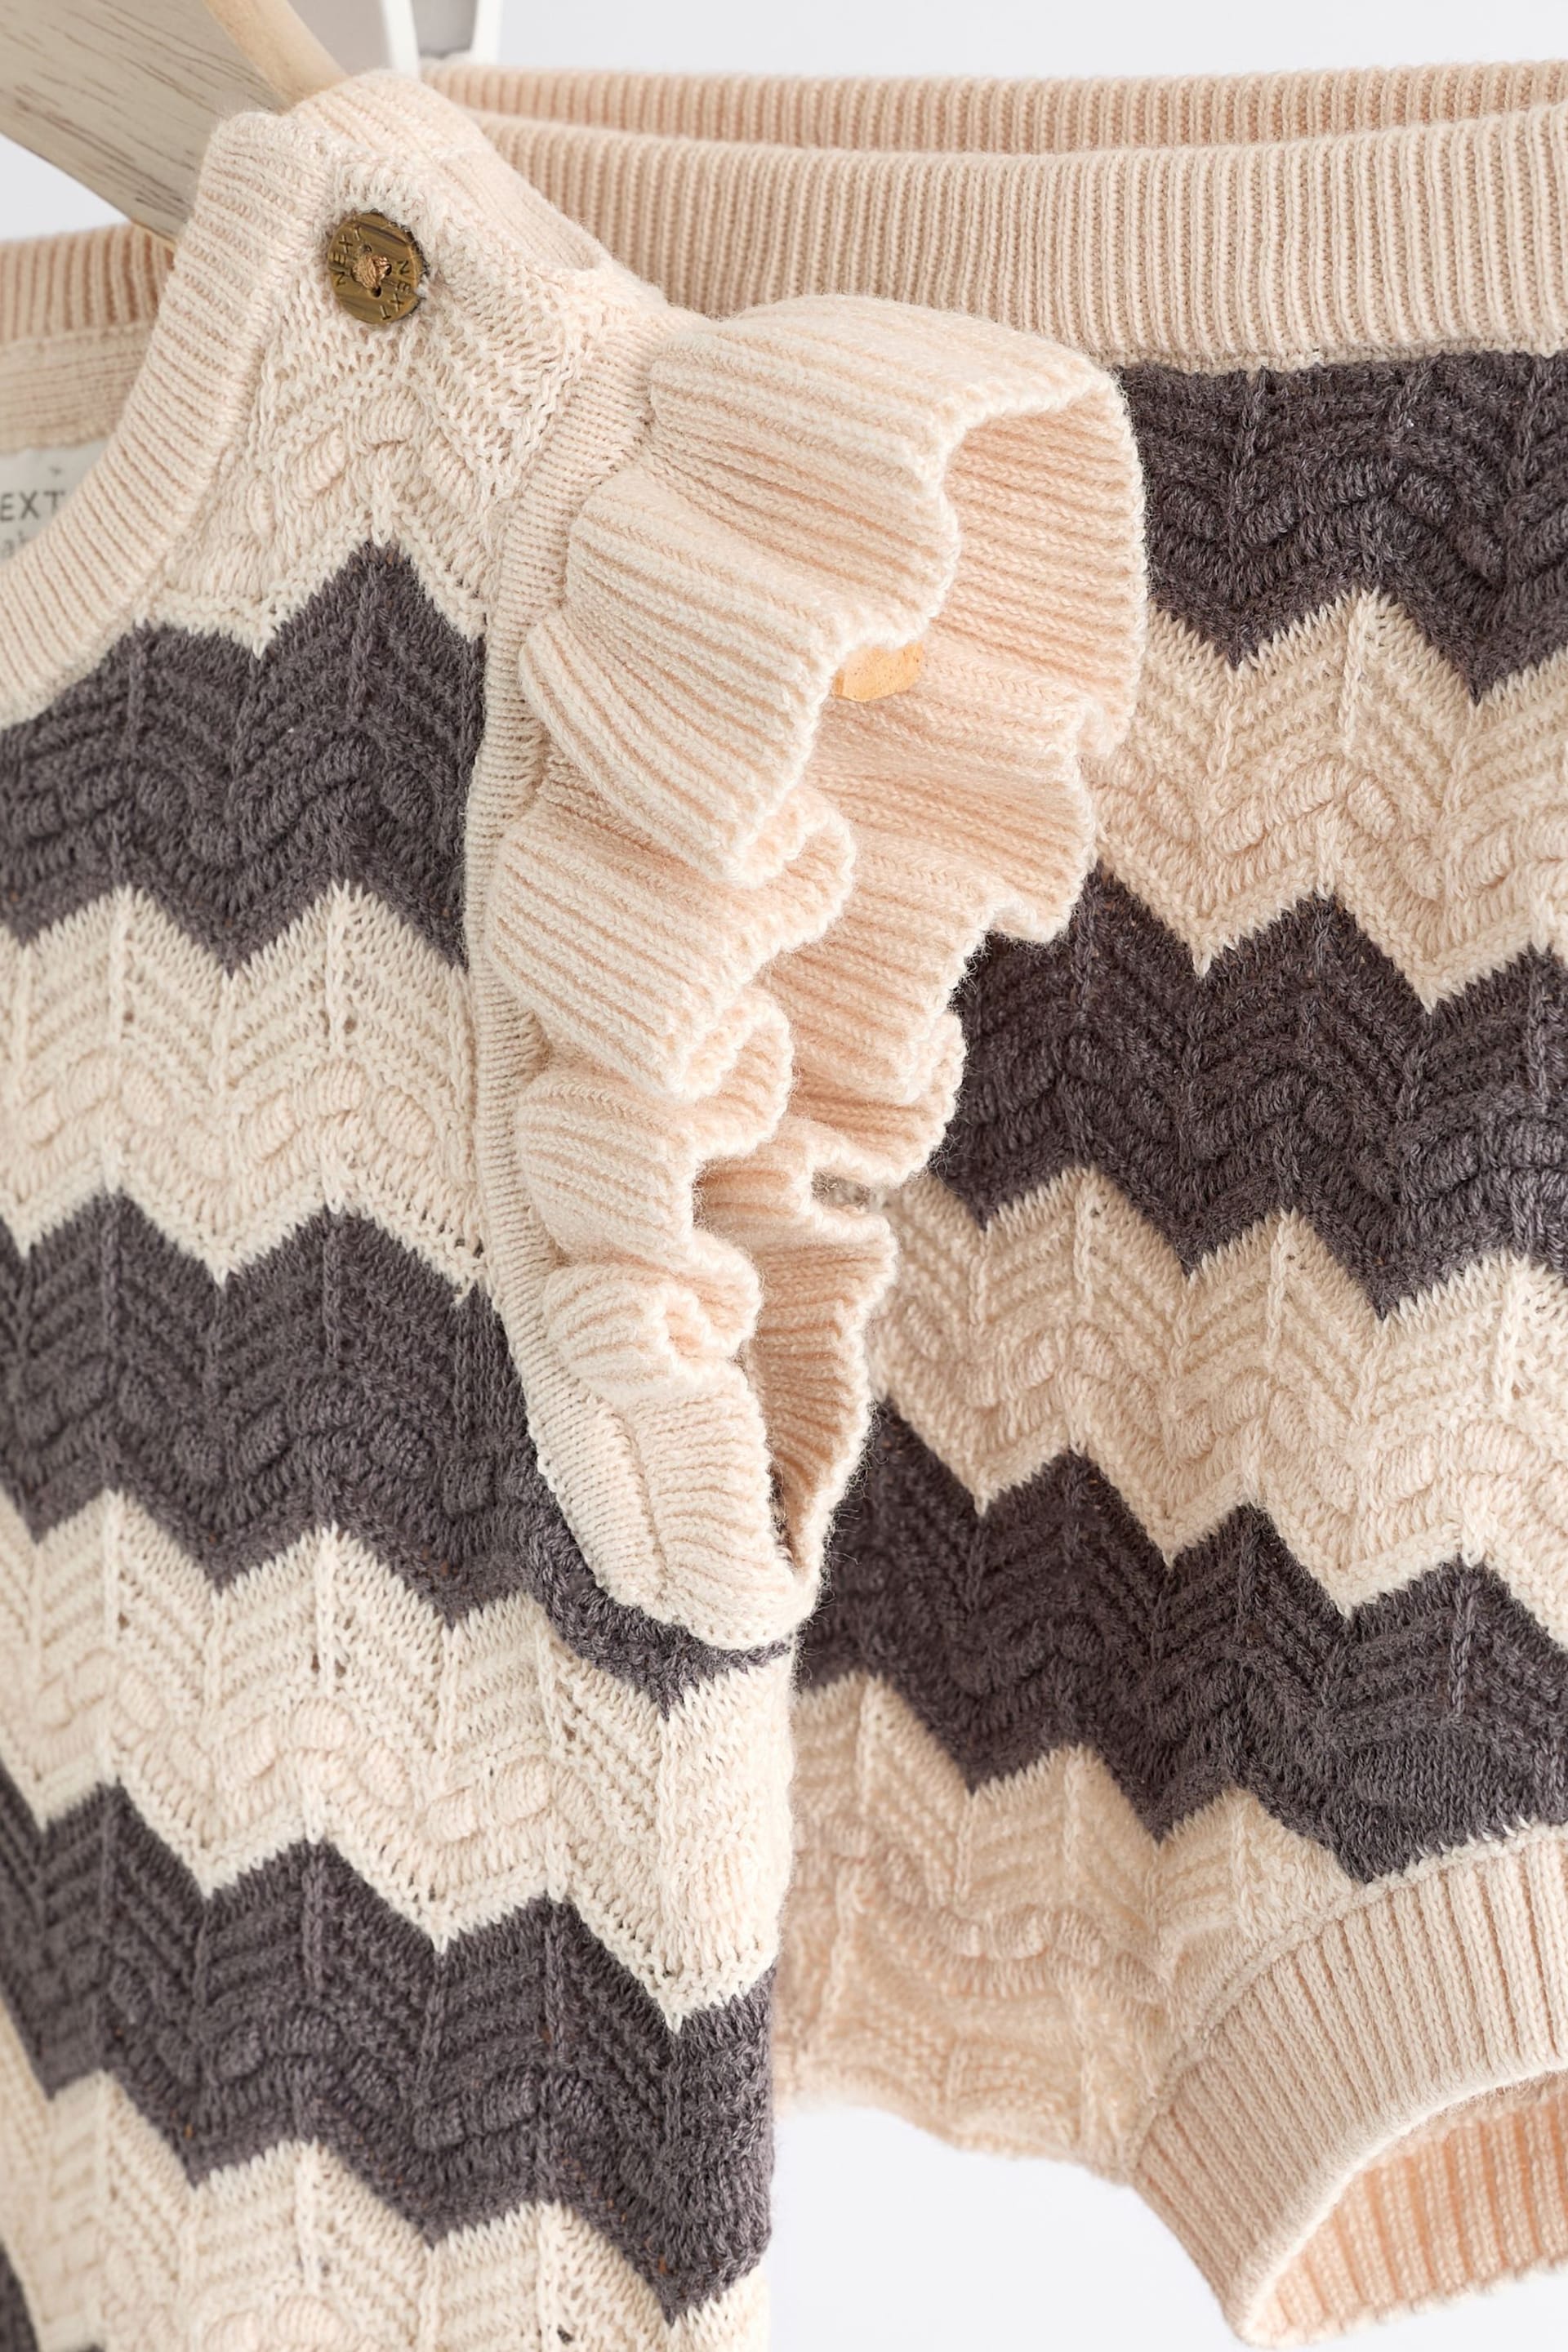 Tan/ Monochrome Zig Zag Stripe Baby Knitted Crochet Top And Shorts Set (0mths-2yrs) - Image 8 of 9